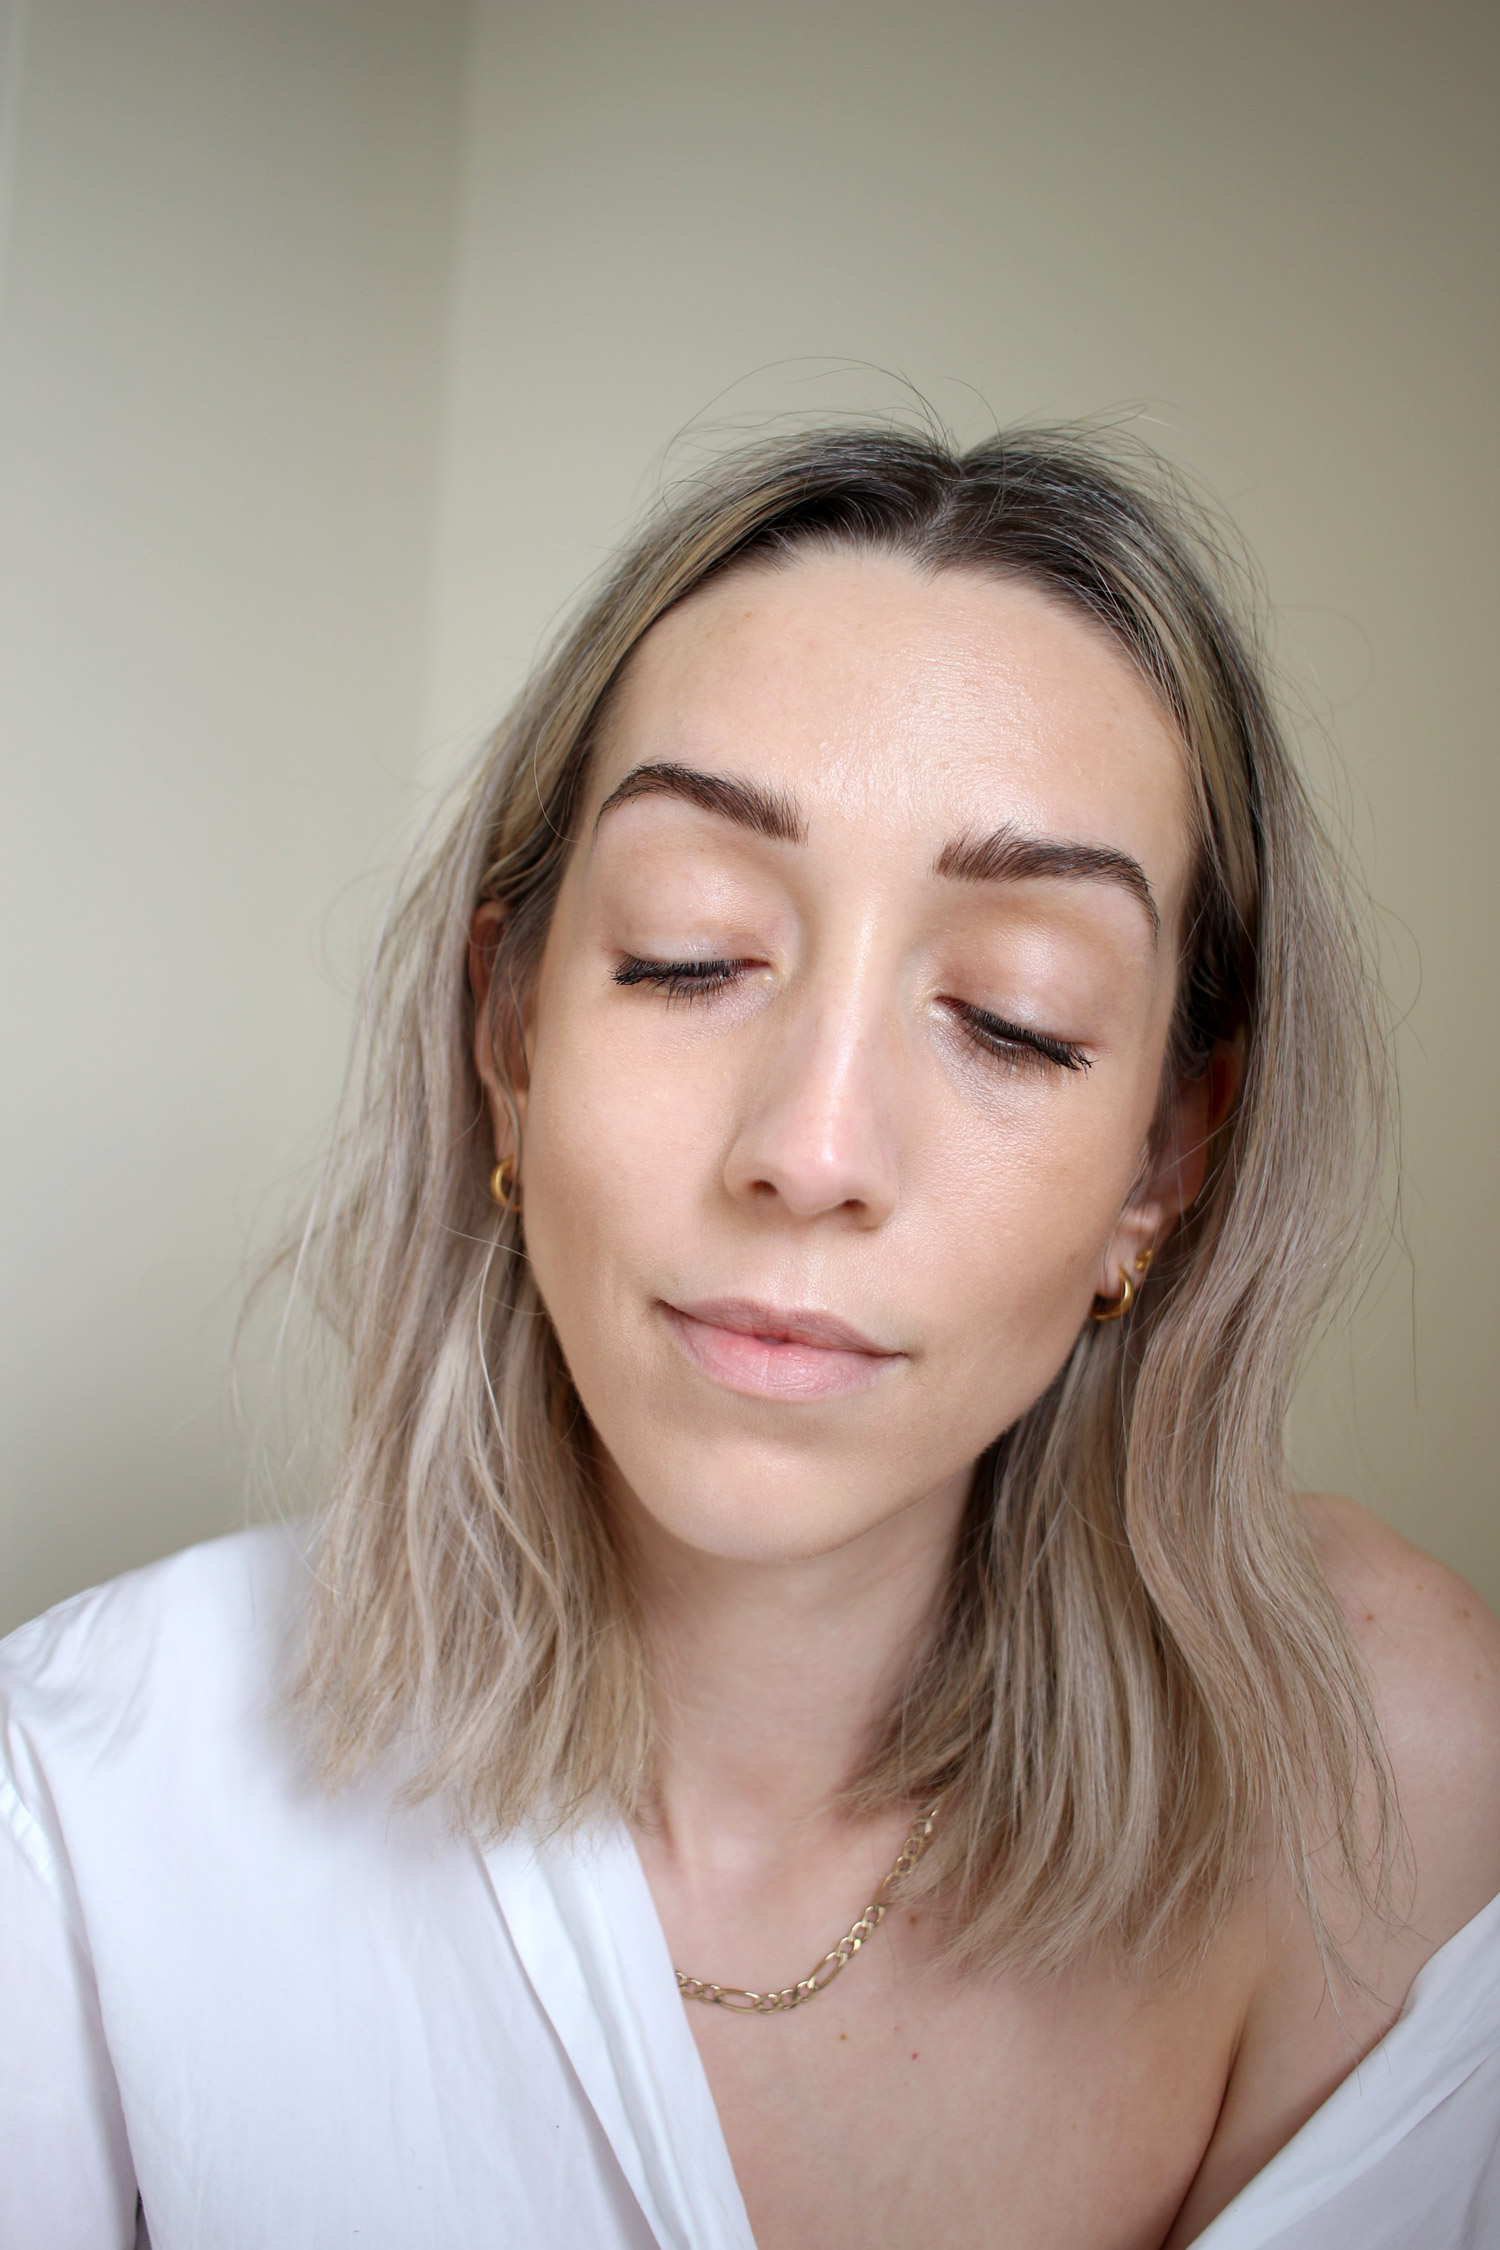 shiseido-synchro-skin-self-refreshing-tint-and-concealer-review-4